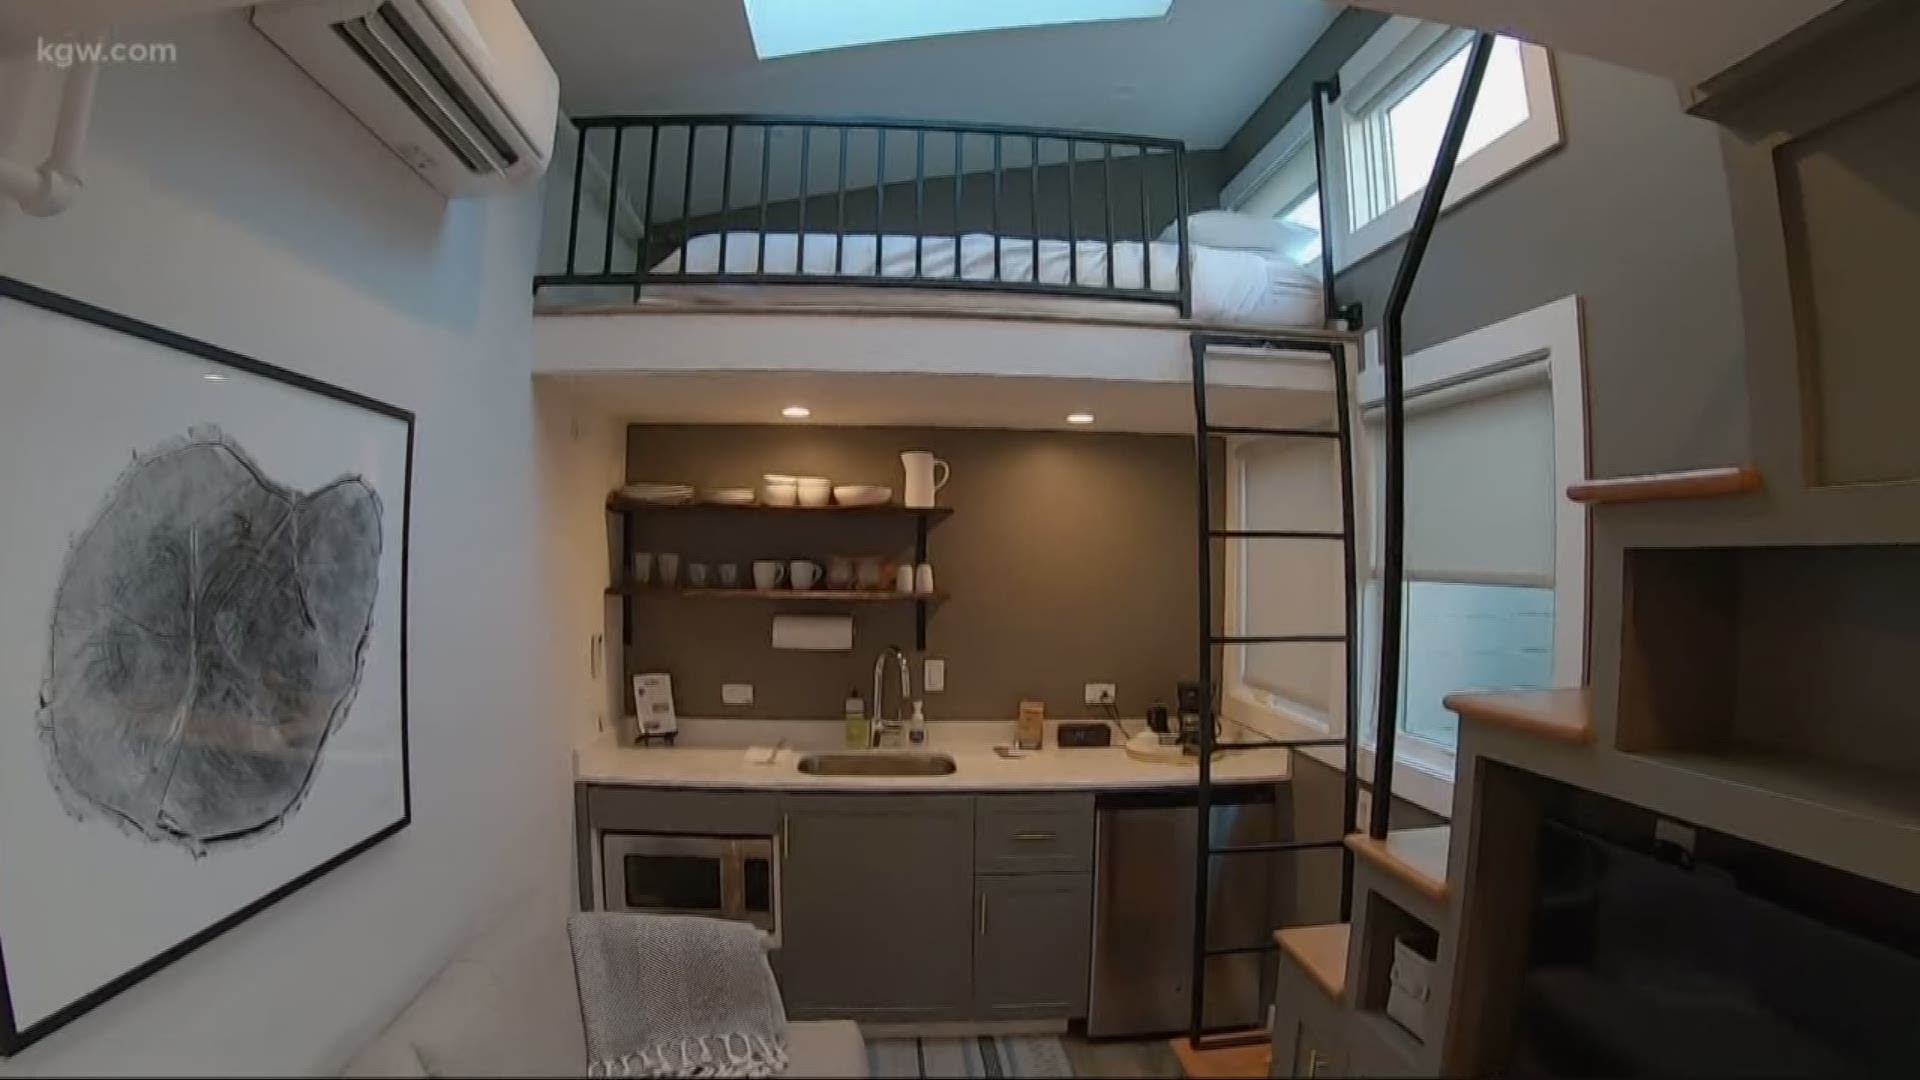 Slabtown Village is a hotel made up of three tiny homes. It is being billed as Portland’s only luxury tiny home hotel
slabtownvillage.com
#TonightwithCassidy